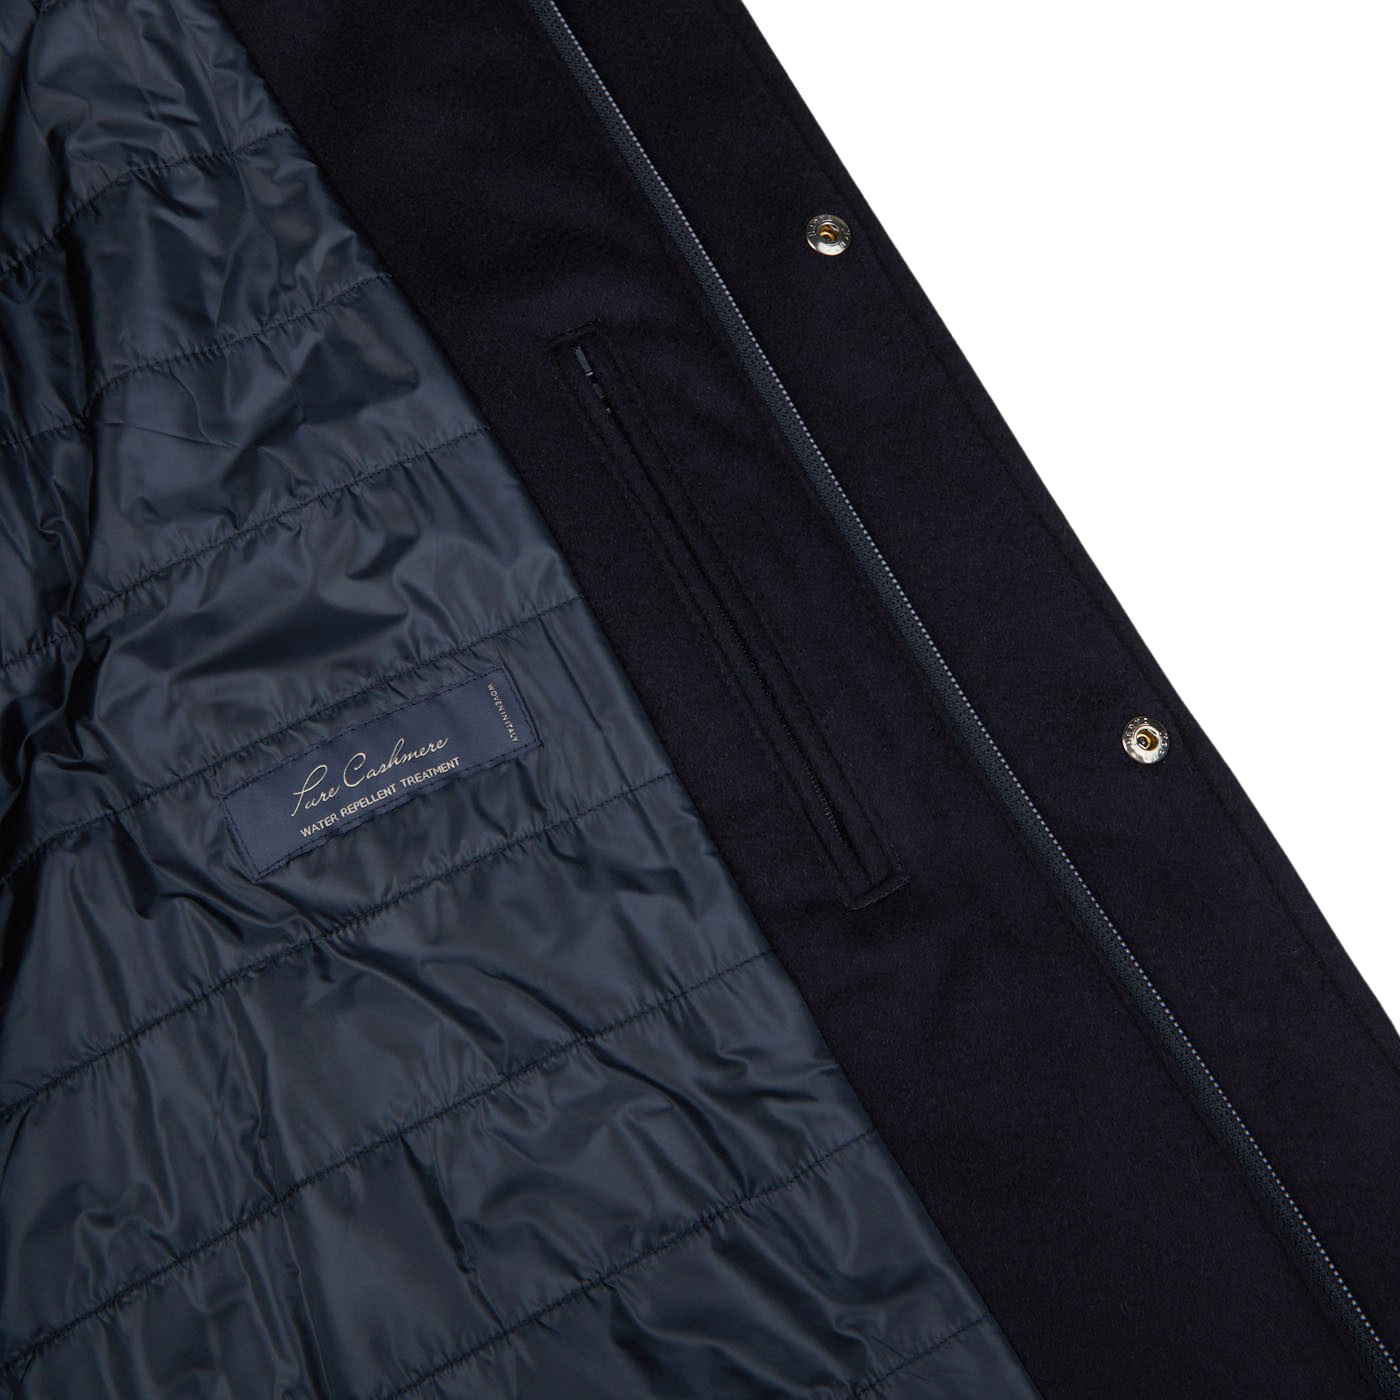 A Navy Blue Water Repellent Cashmere Car Coat featuring a weather storm system and Herno branding.